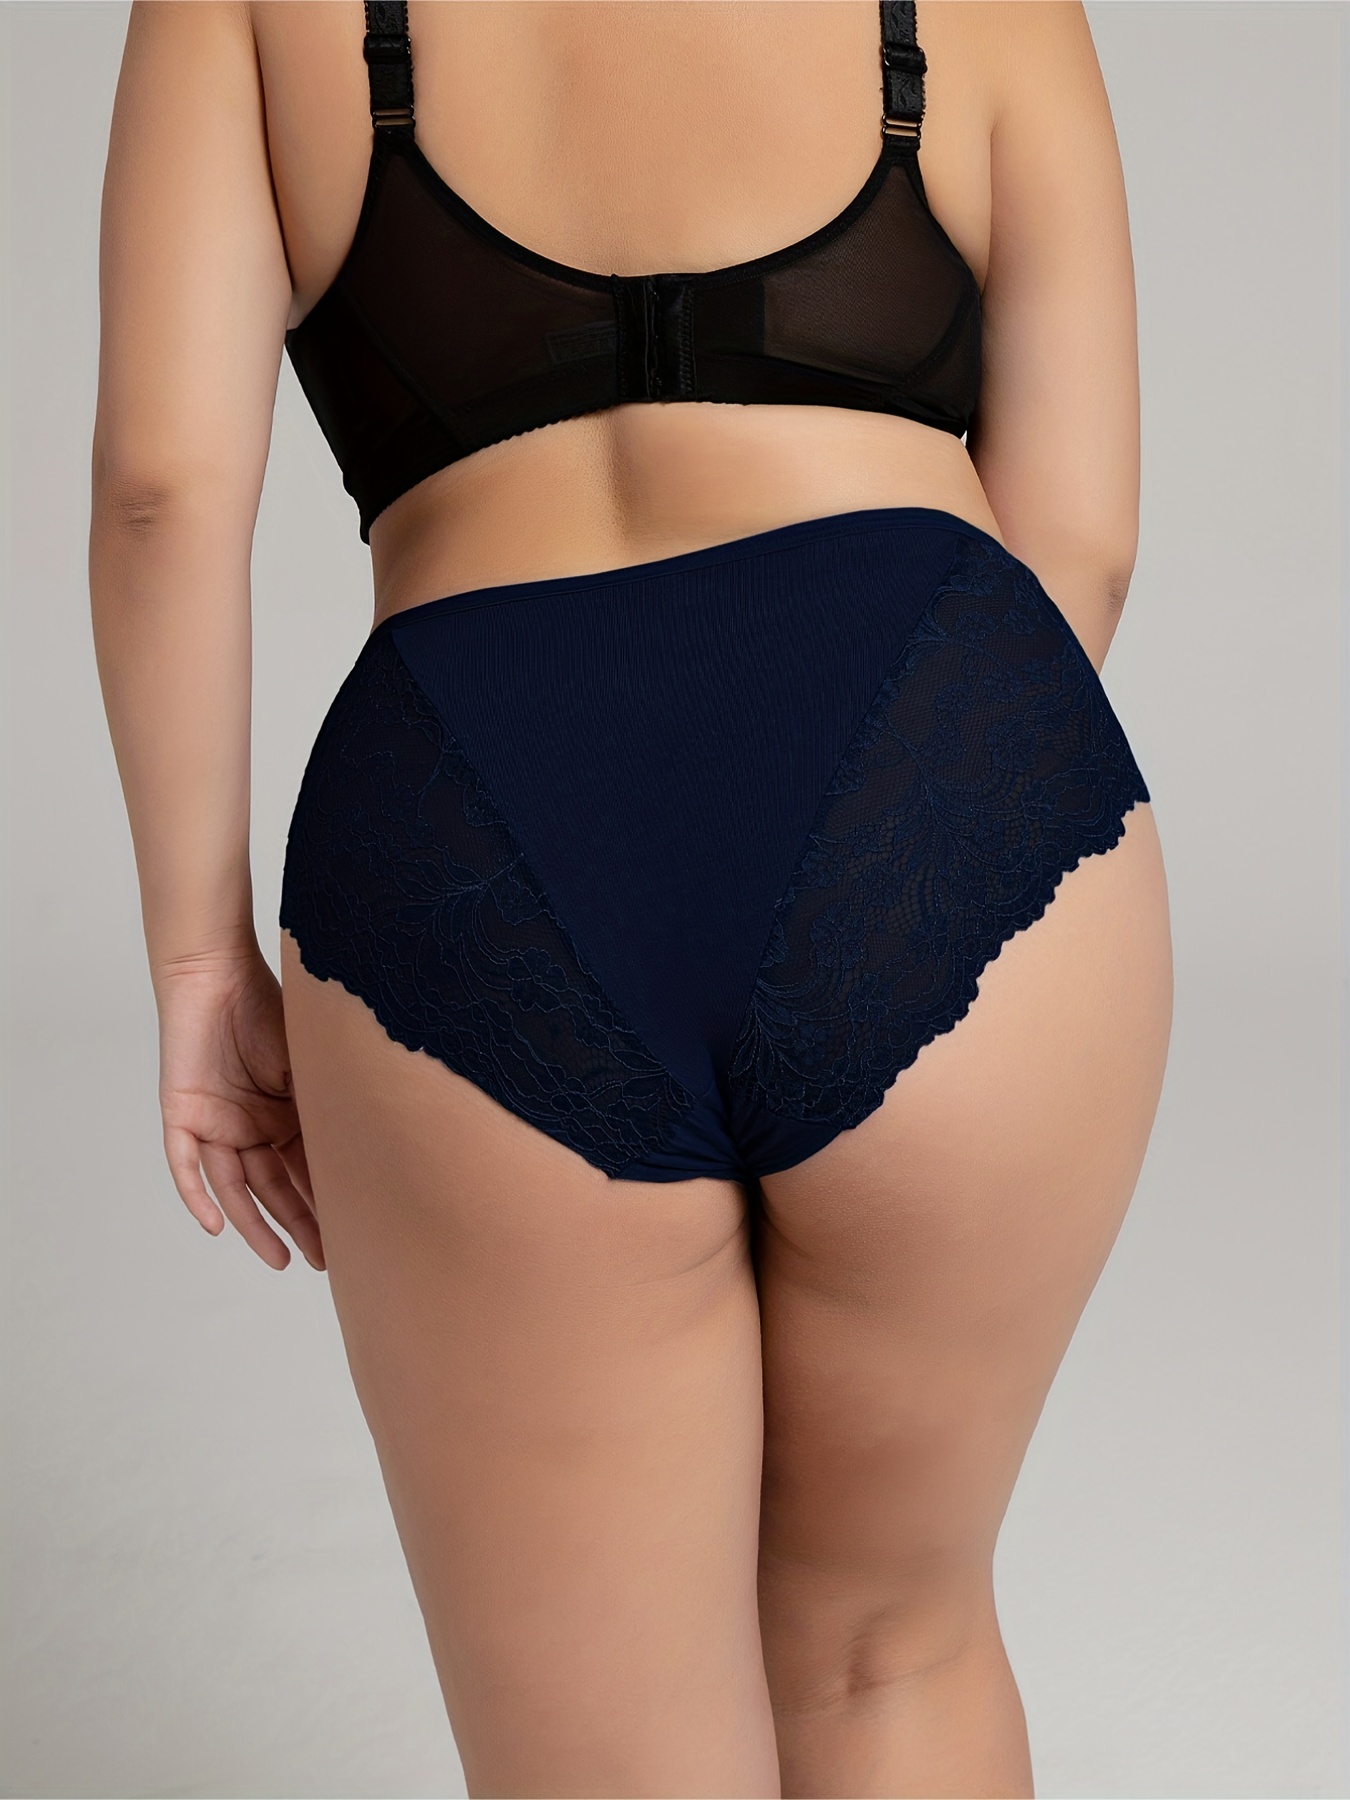 Floral Lace Plus Size High Waisted Cheeky Panties For Women Ultra Thin  Black, White, Beige, Blue, And Pink Briefs In Sizes L 5XL From Qutecloth,  $11.19